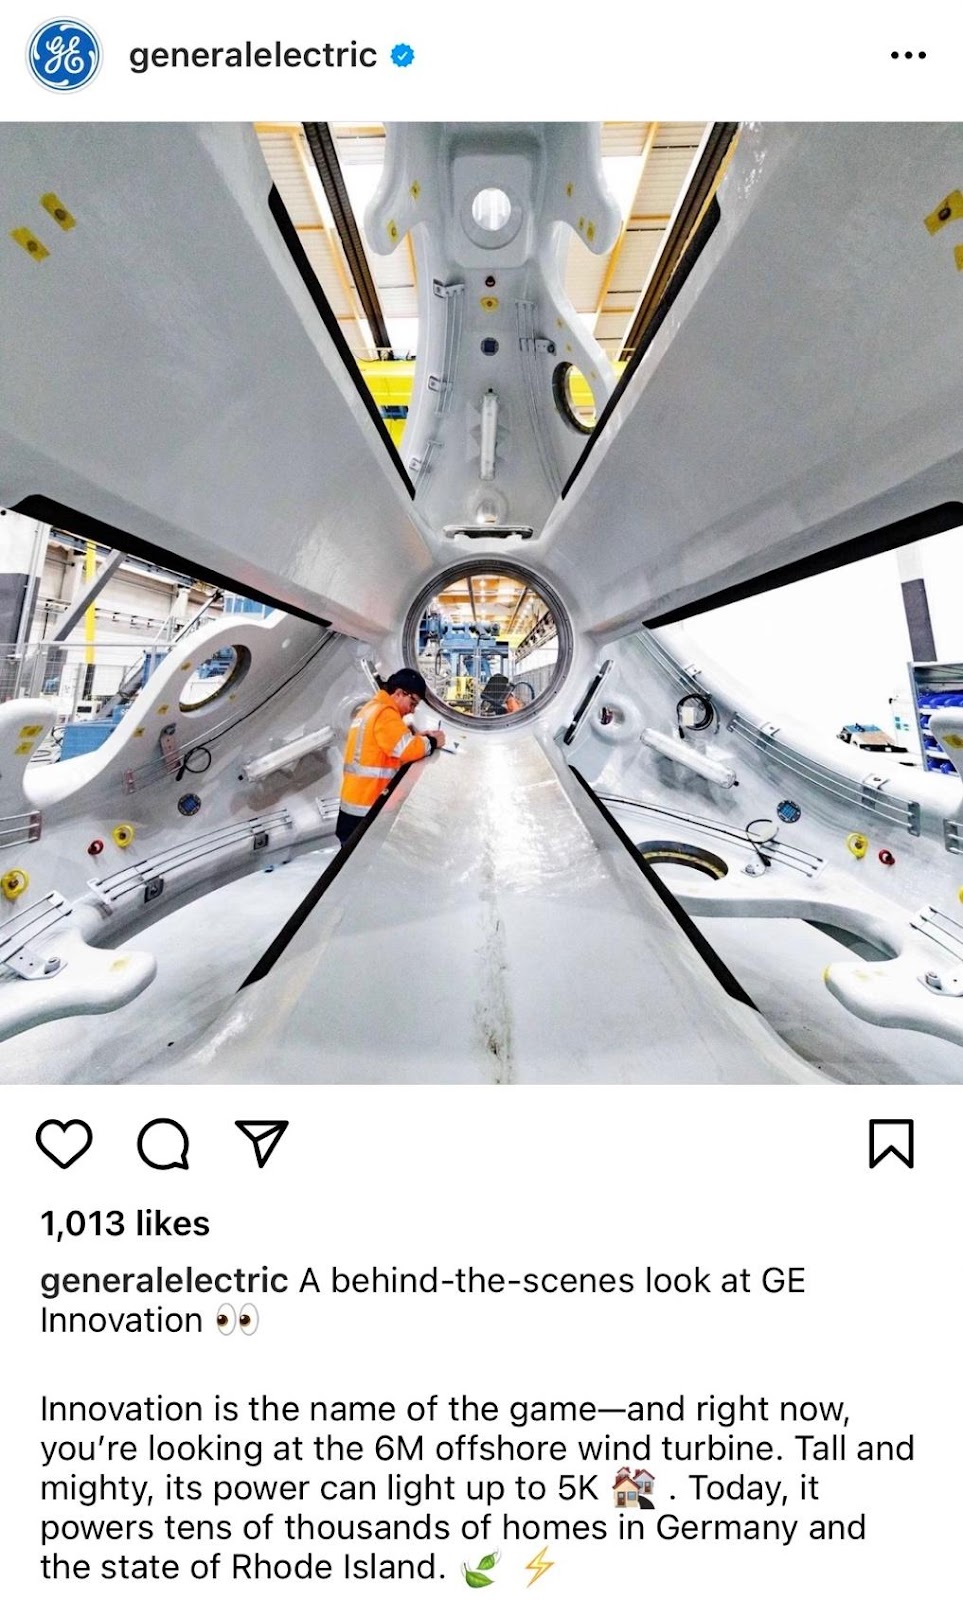 General Electric Instagram post about GE innovation